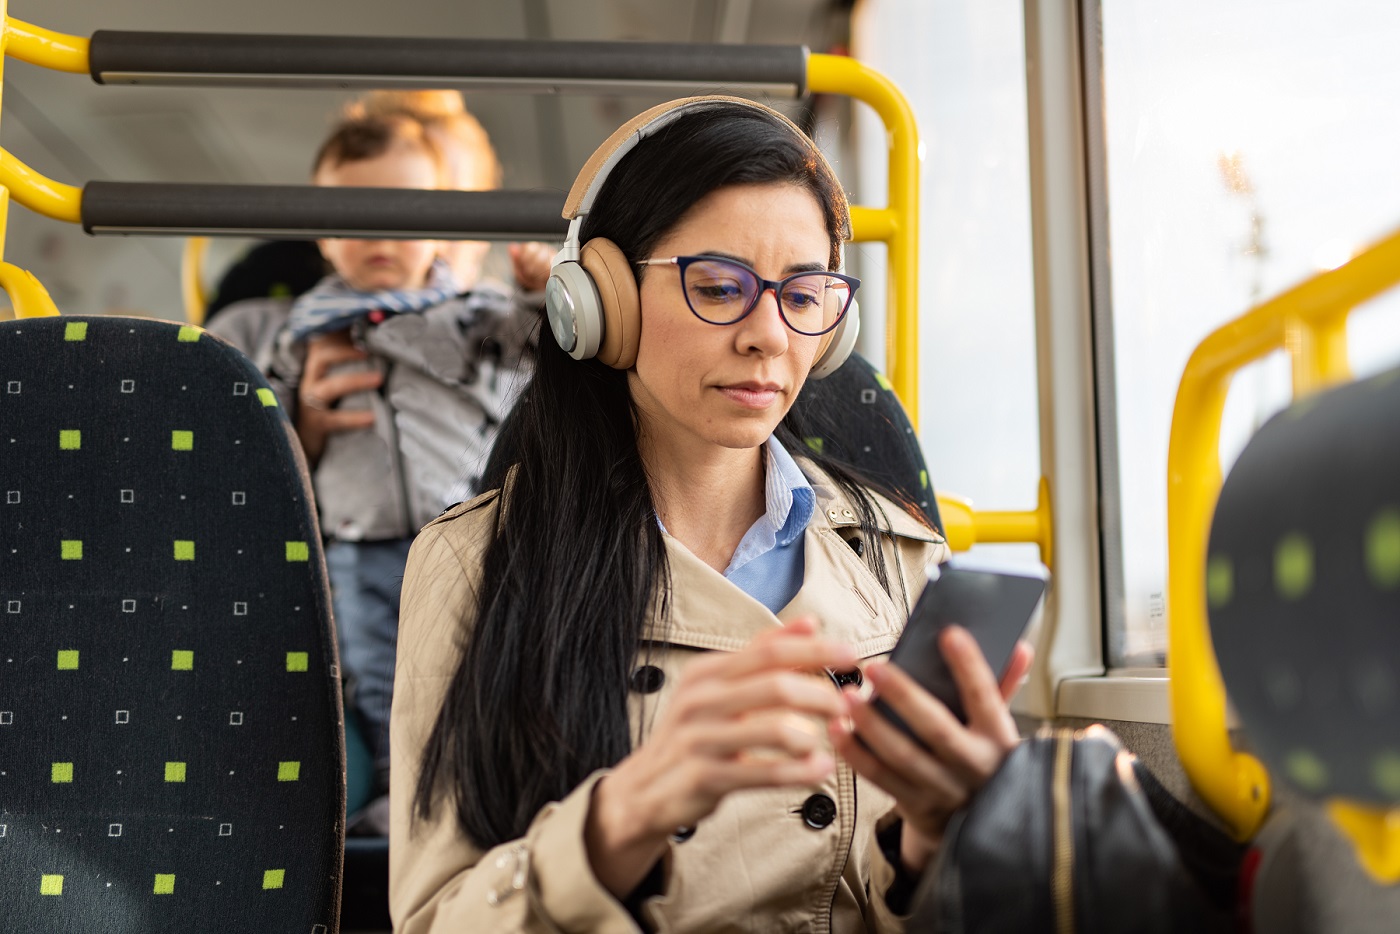 Picture of young, professional woman listening to music and browsing her smartphone while commuting on a bus.